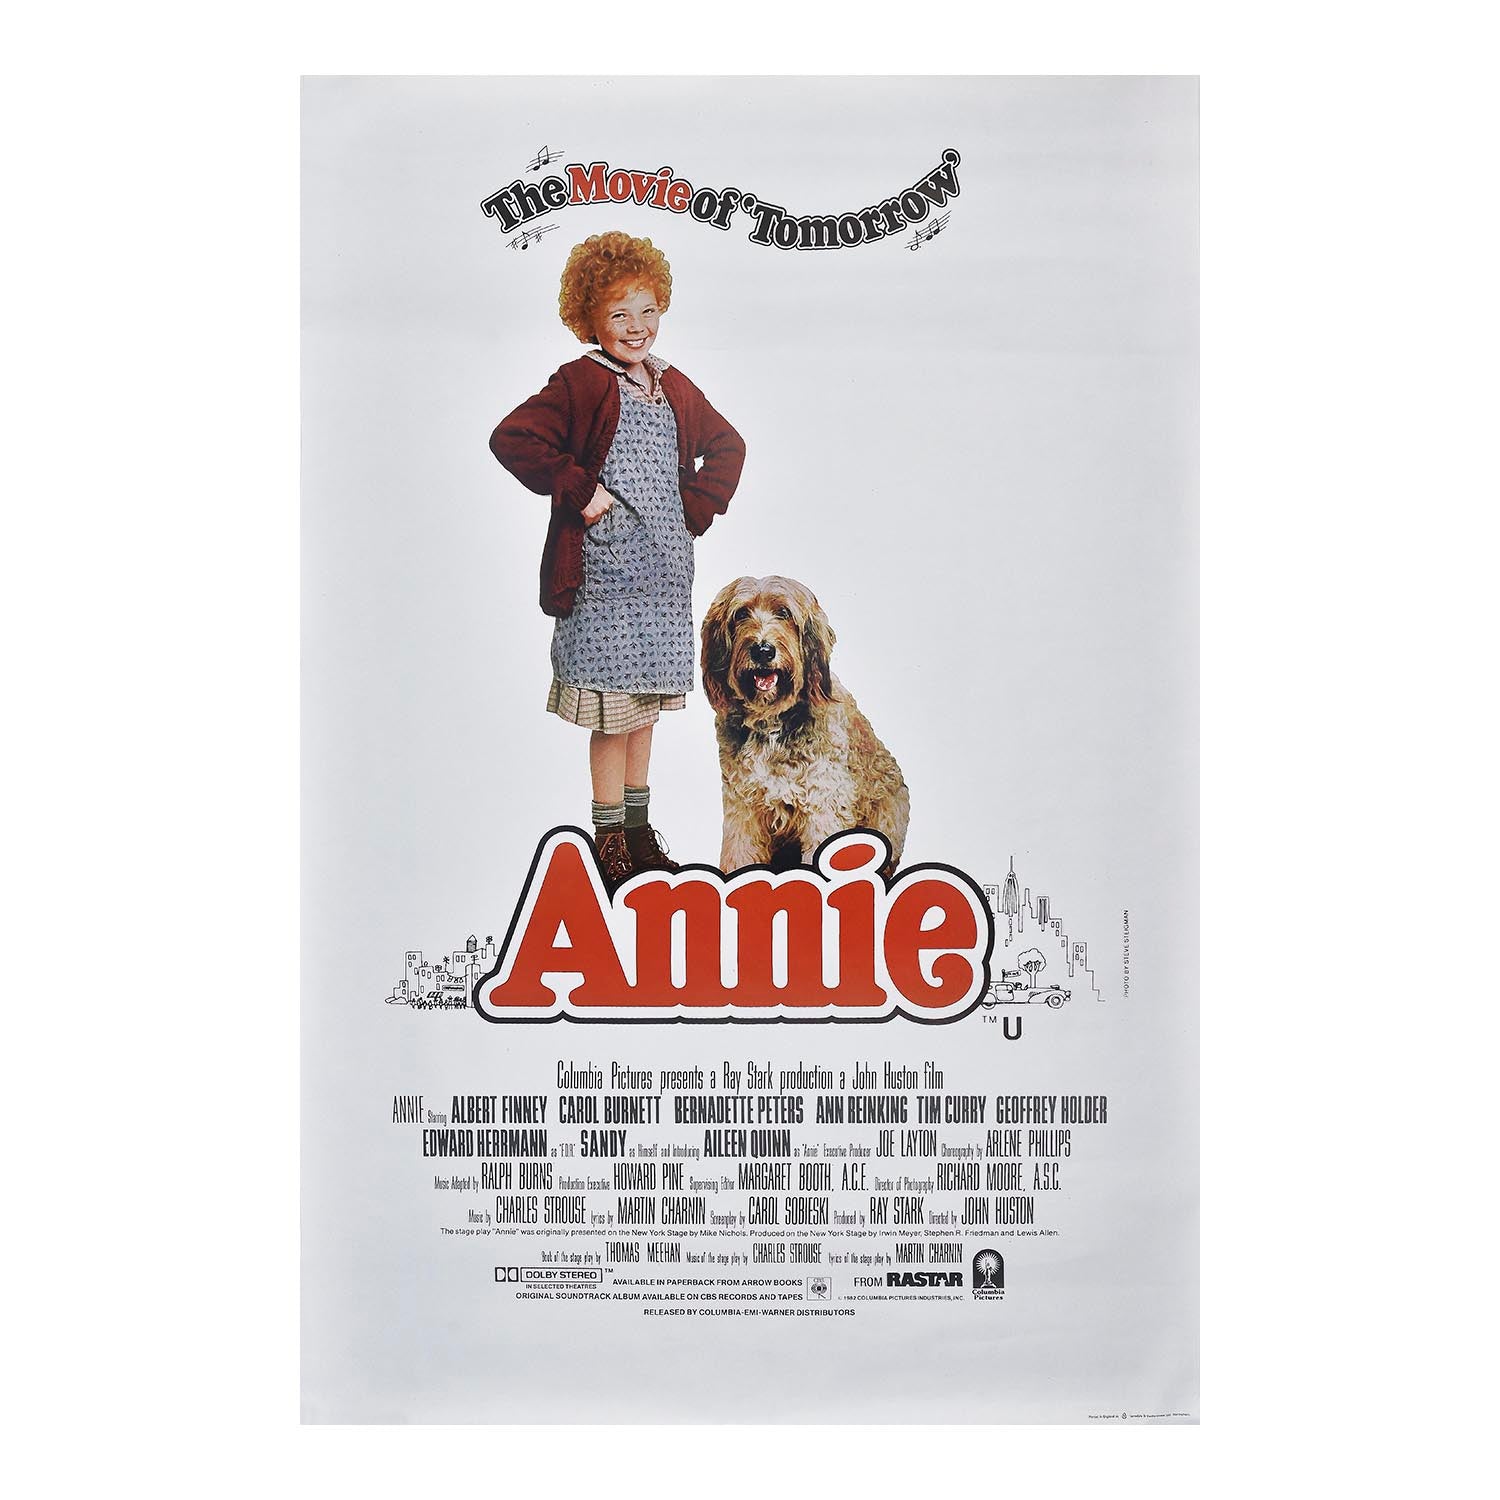 uncommon, original, hoardings-sized promotional poster for the UK movie release of Annie, 1982. Based on the 1977 Broadway musical of the same name by Charles Strouse, Martin Charnin and Thomas Meehan.